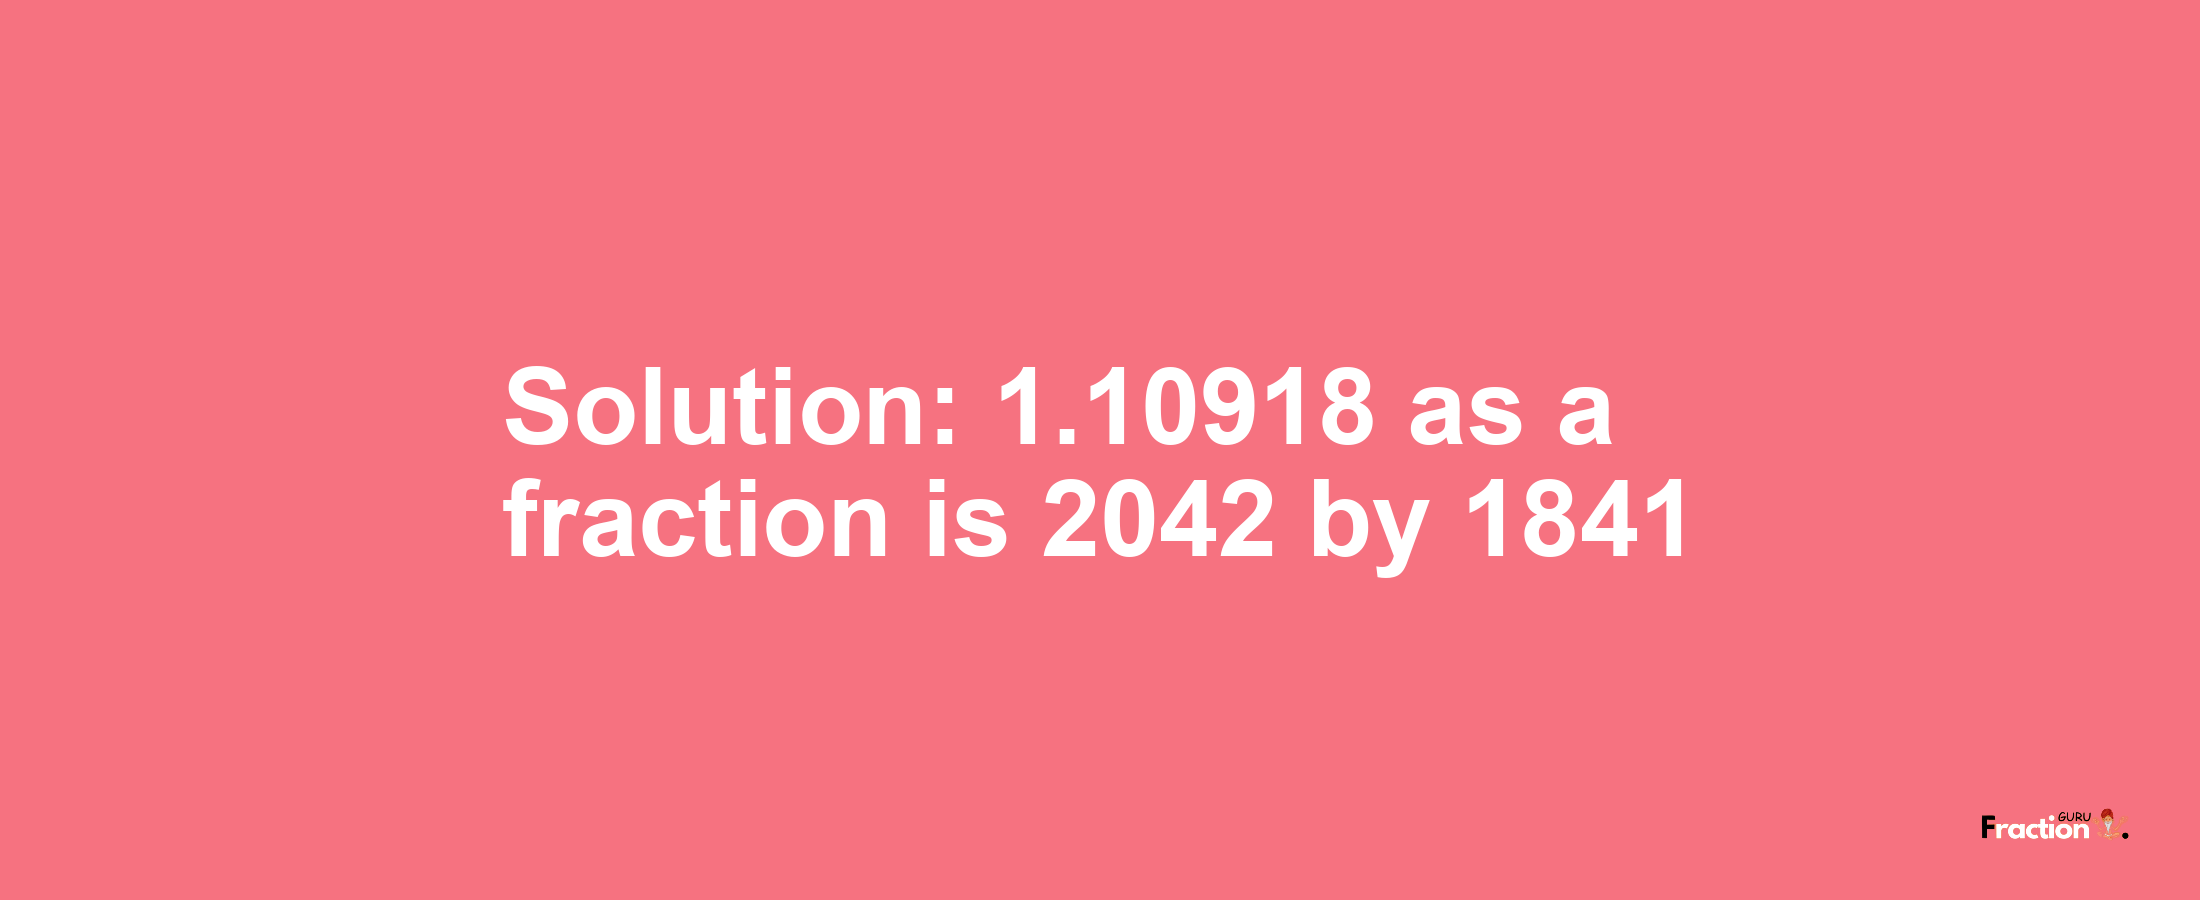 Solution:1.10918 as a fraction is 2042/1841